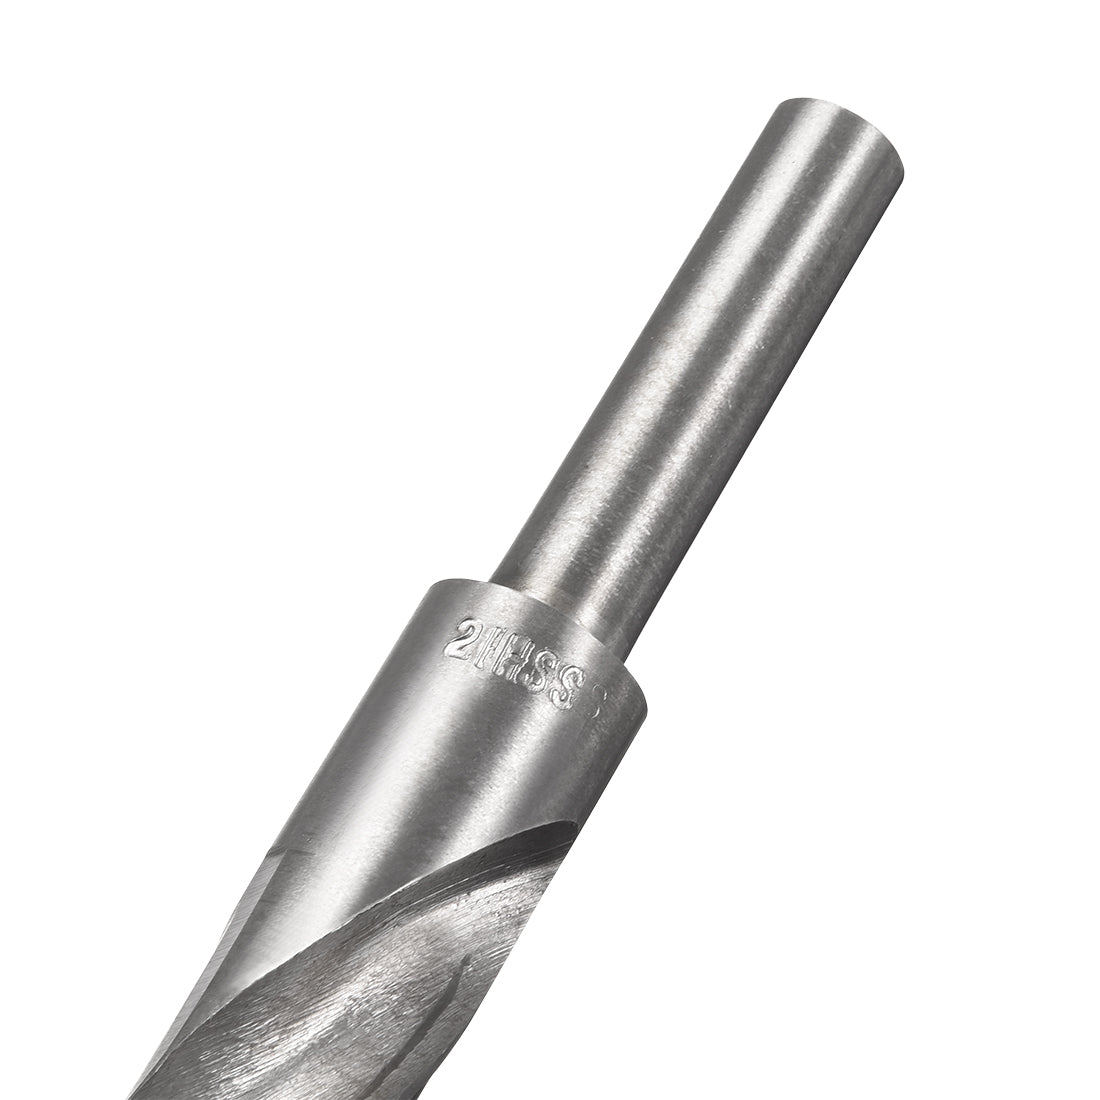 uxcell Uxcell 21mm Reduced Shank Drill Bit High Speed Steel 4241 with 1/2" Straight Shank